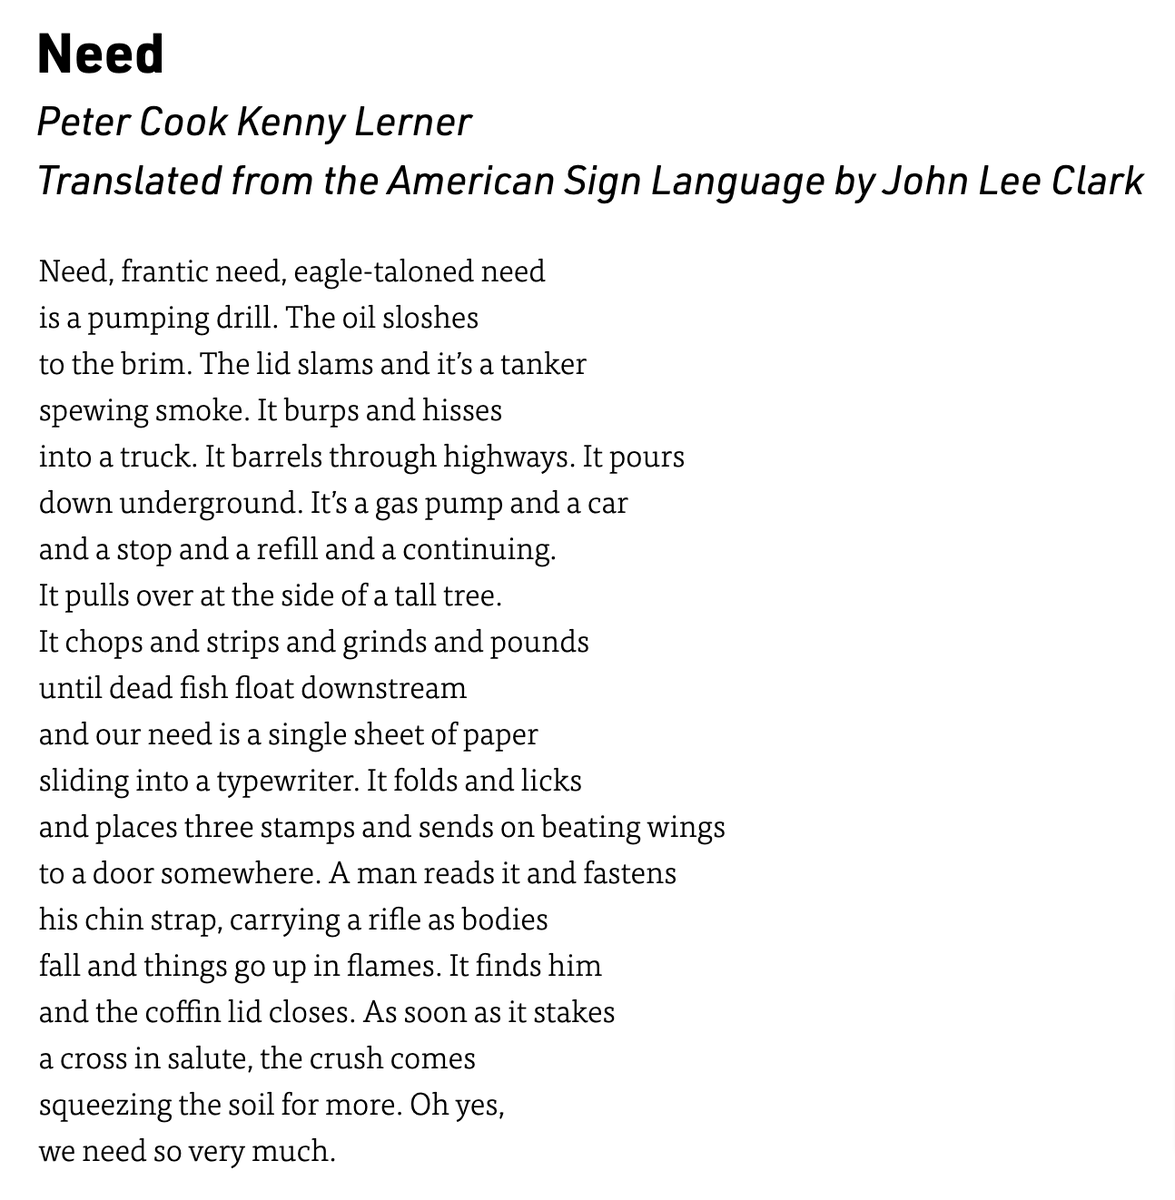 'Need', a poem by Peter Cook and Kenny Lerner, translated from the American Sign Language by John Lee Clark poems.com/poem/need/ via @Poetry_Daily and @wwnorton